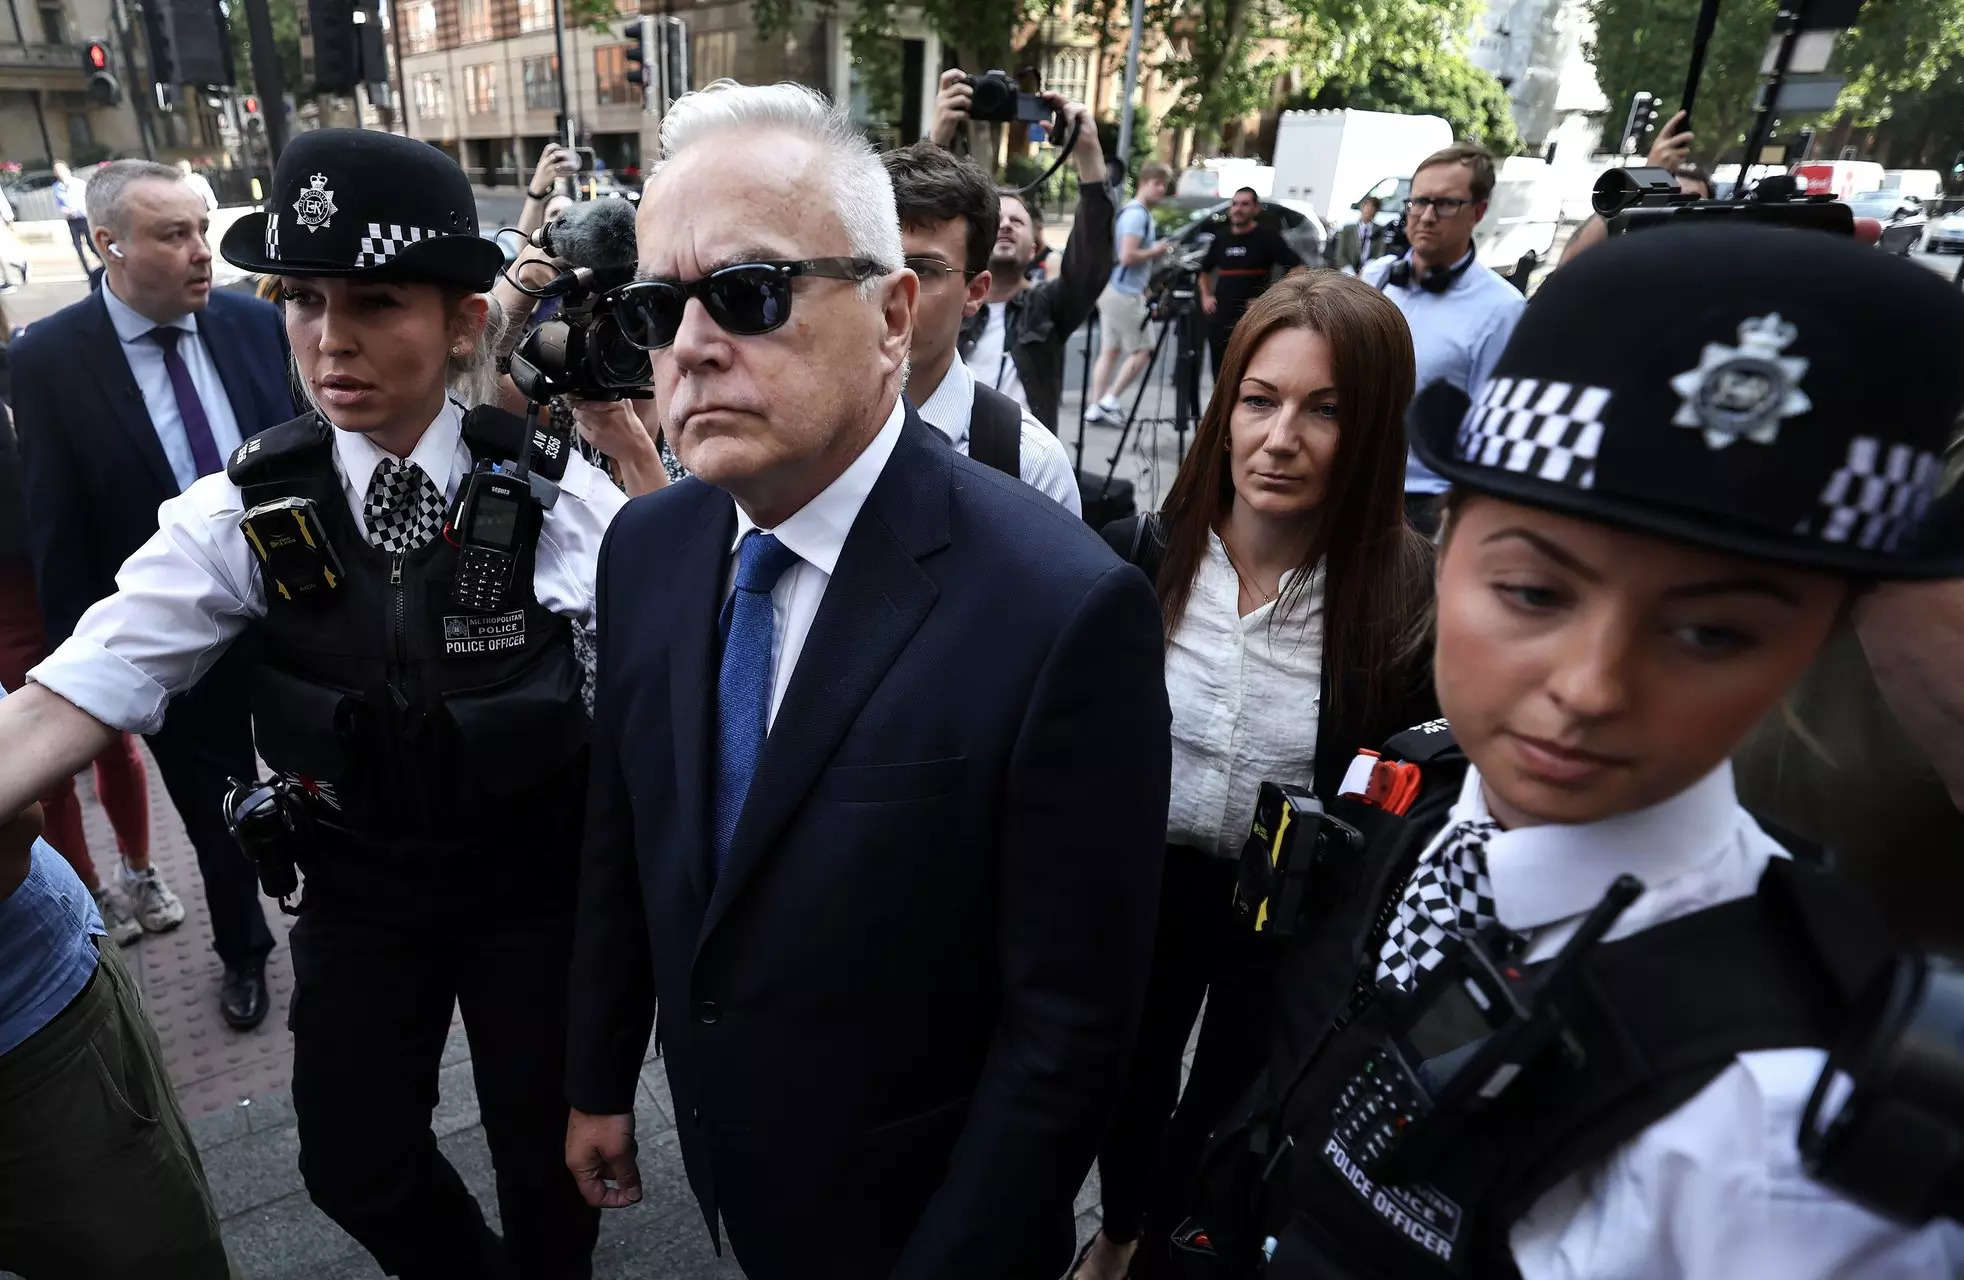 Ex-BBC news presenter Huw Edwards pleads guilty to charges of indecent images of children 